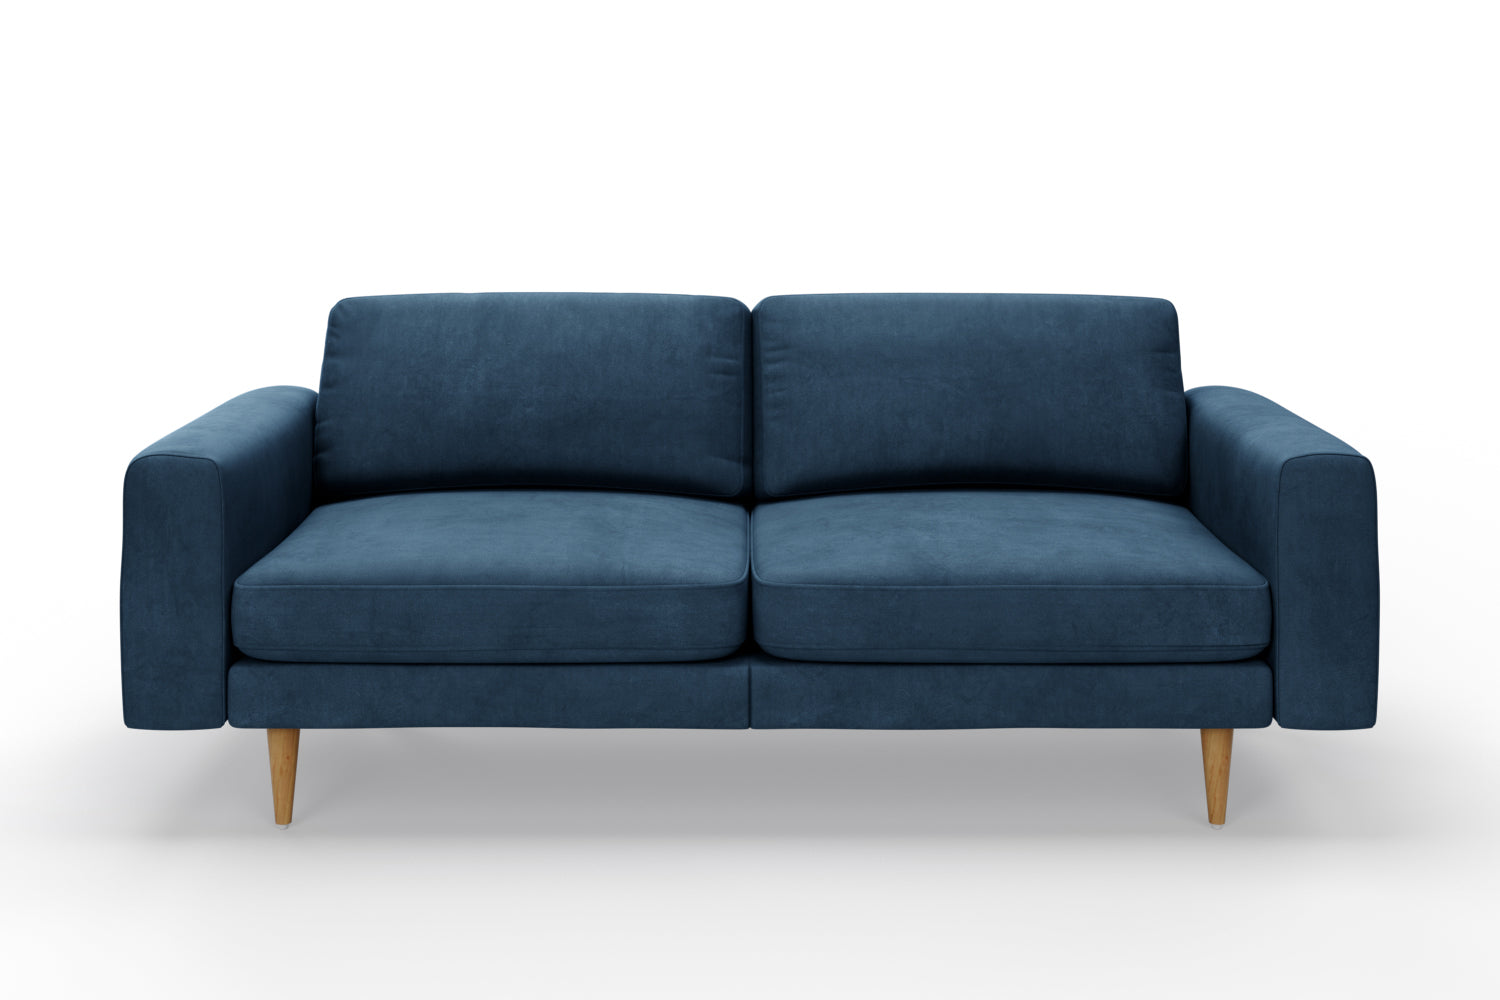 SNUG | The Big Chill 3 Seater Sofa in Blue Steel variant_40414878367792